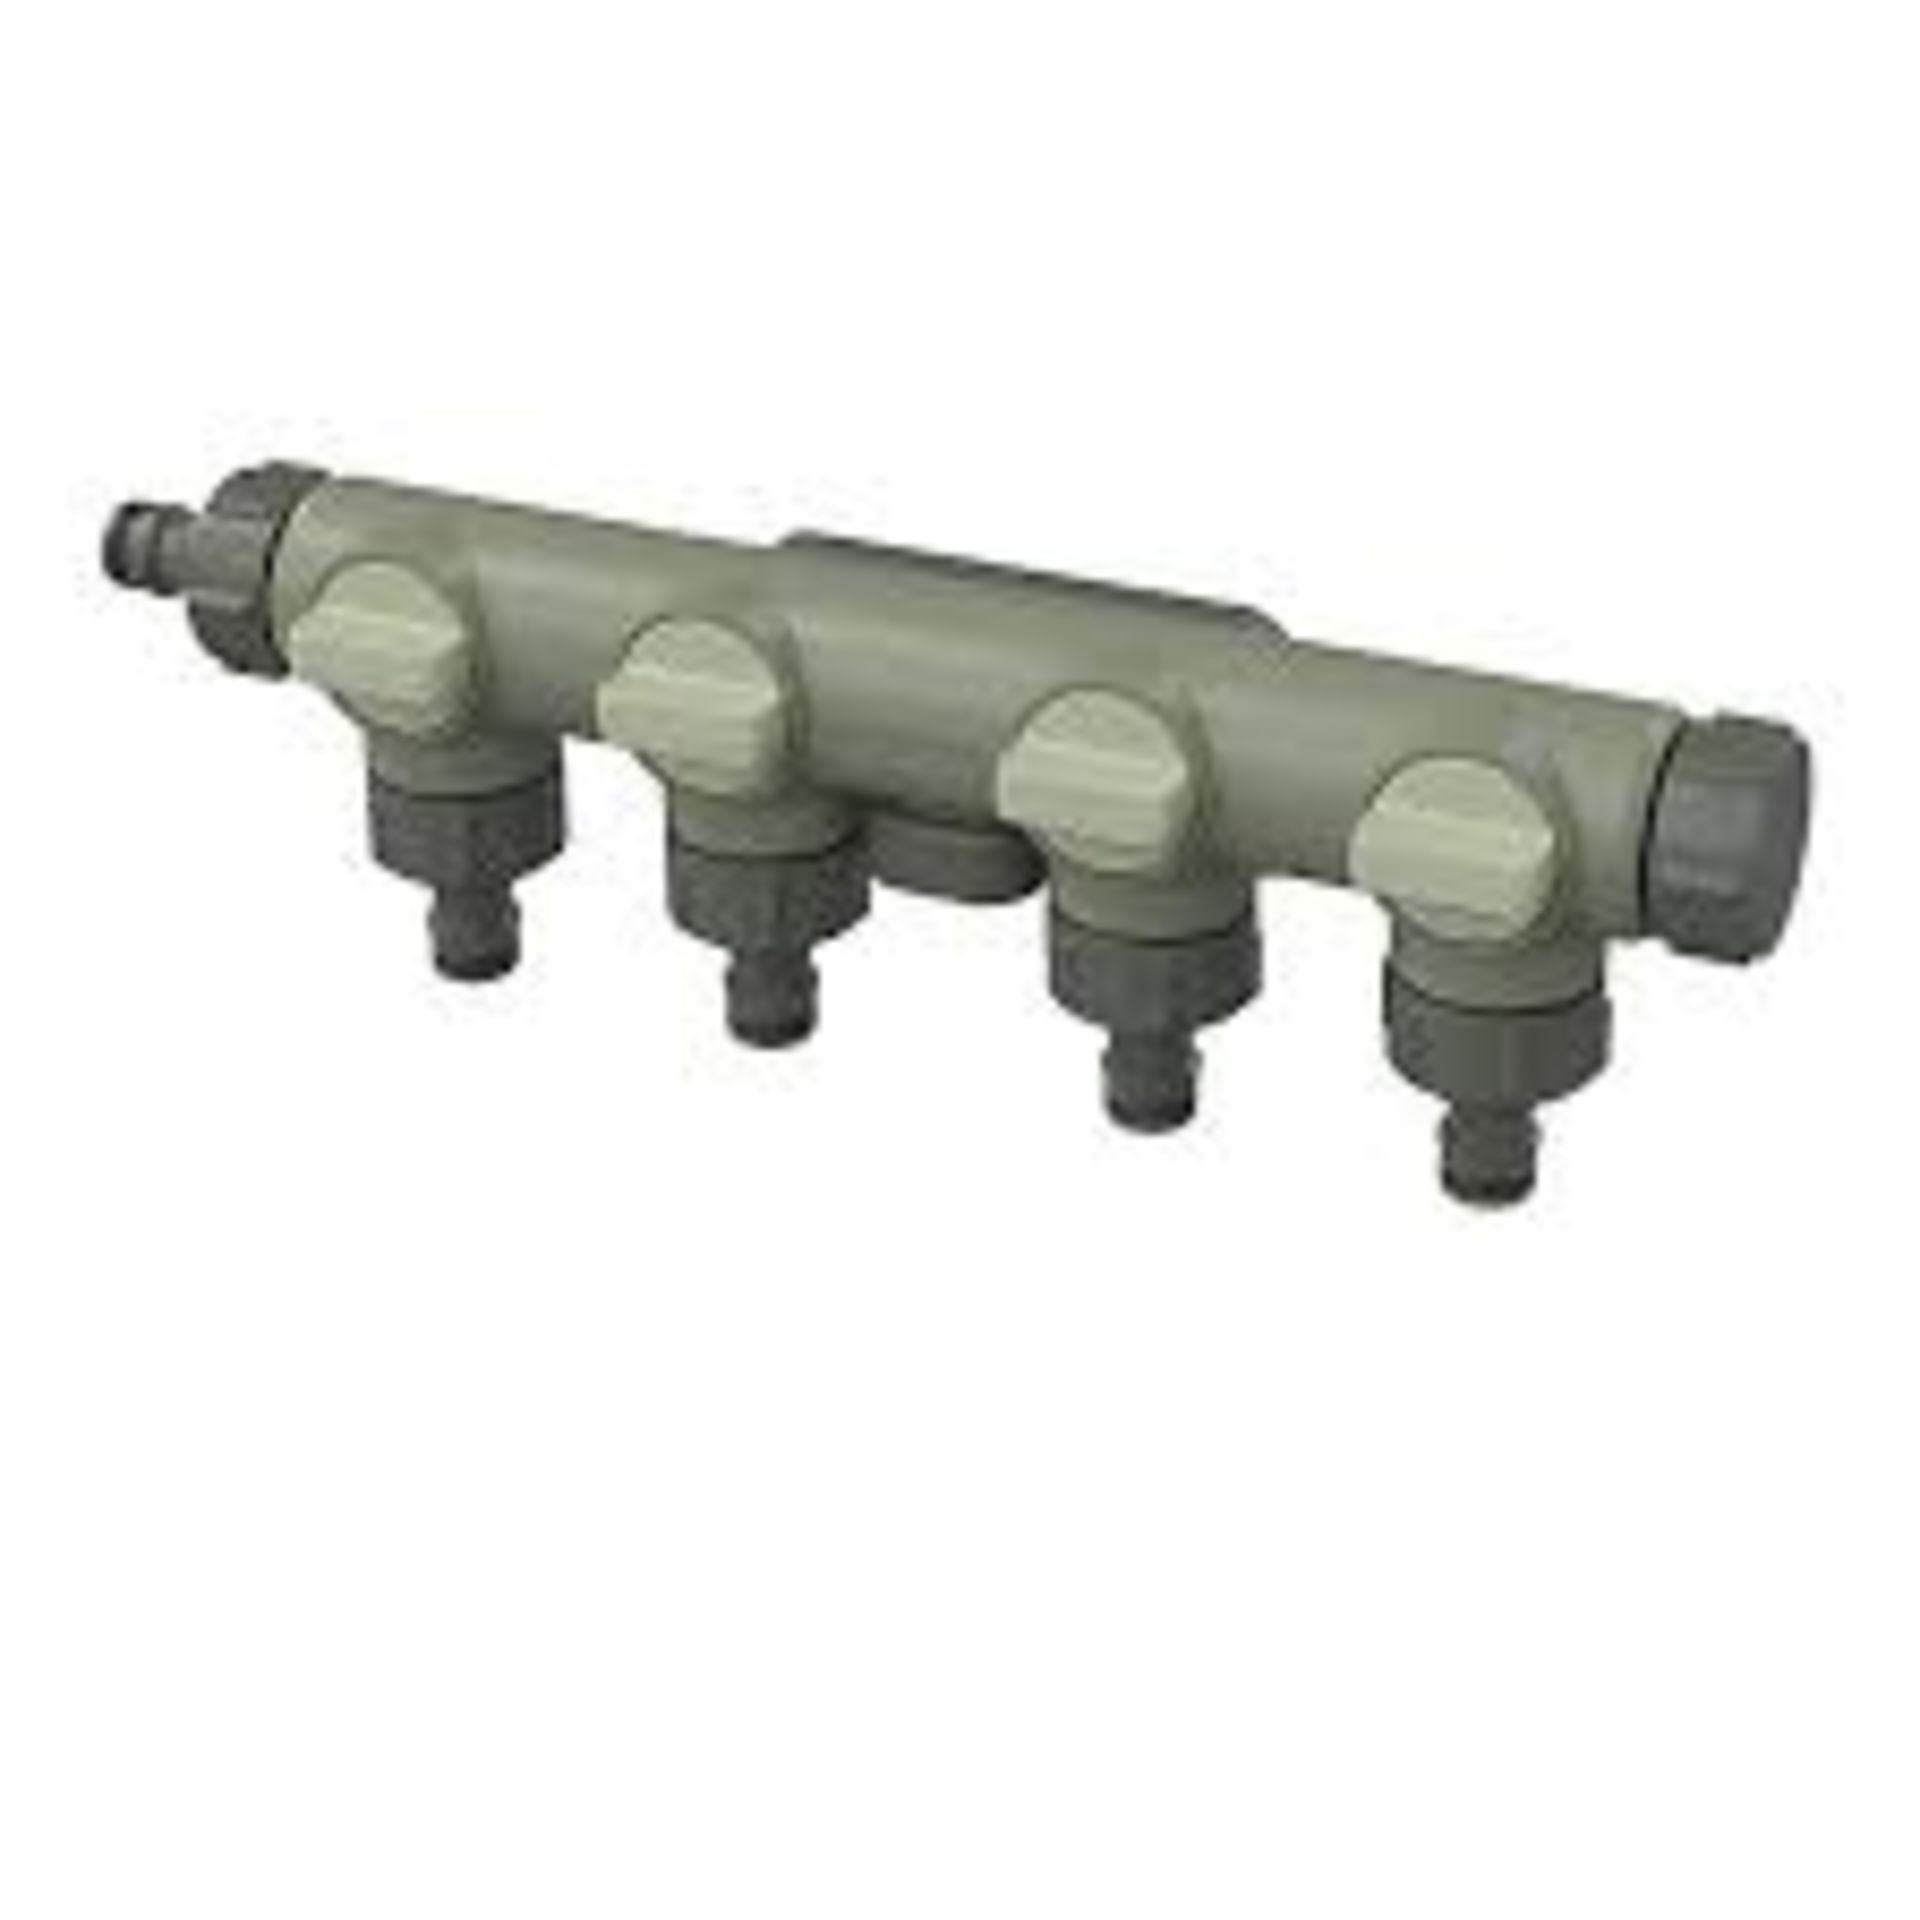 Verve 4-Way Hose Pipe Connector. - R13a.7. This tap connector attaches onto a single inlet and